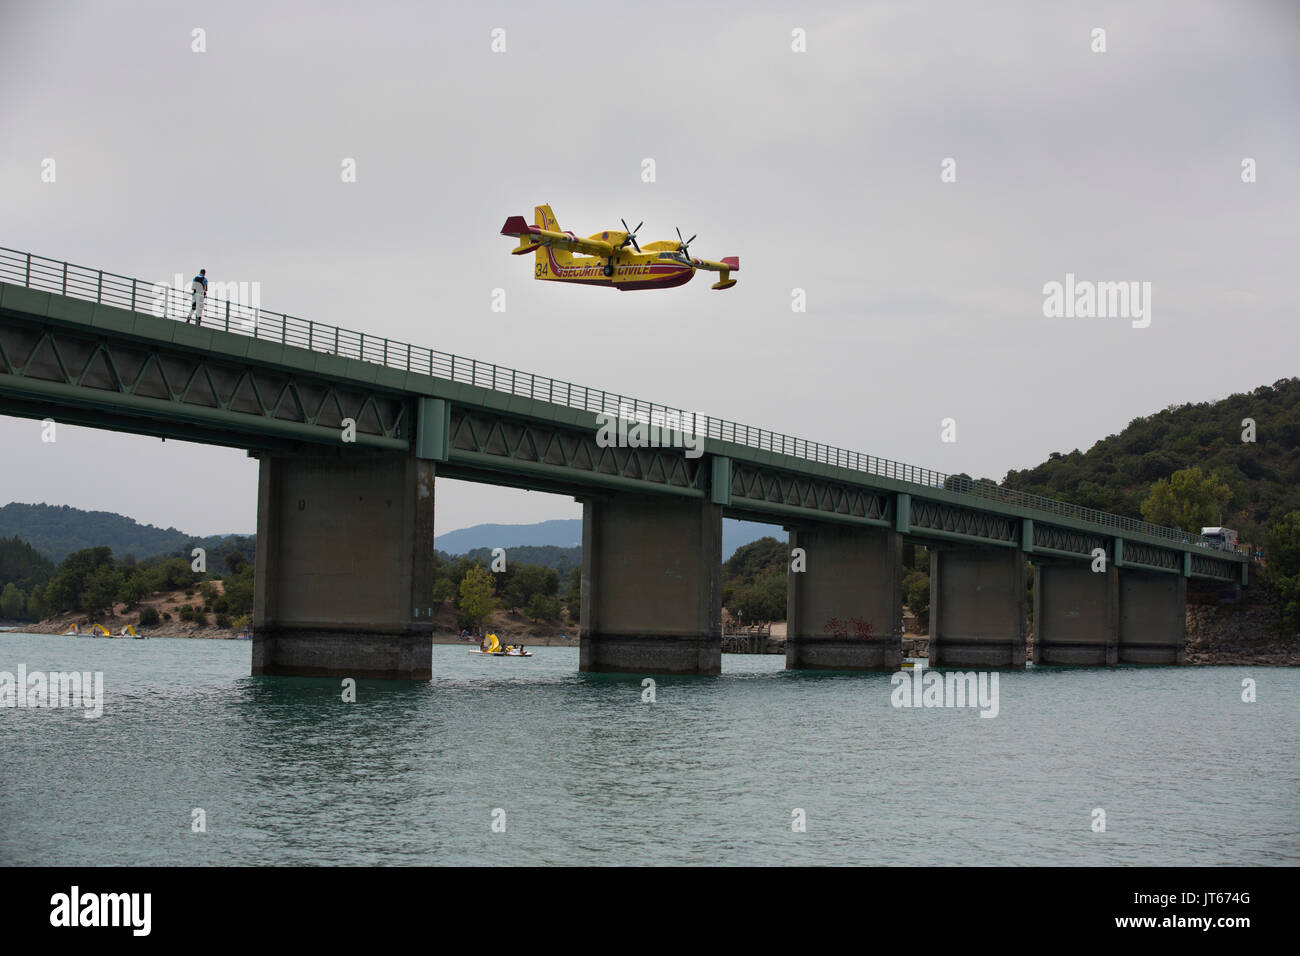 Bathers watch Securite Civile aircarft collecting water at Lac de Saint-Cassien to put out wildfires  in Cote d'Azur, Southern France, Mediterranean Stock Photo